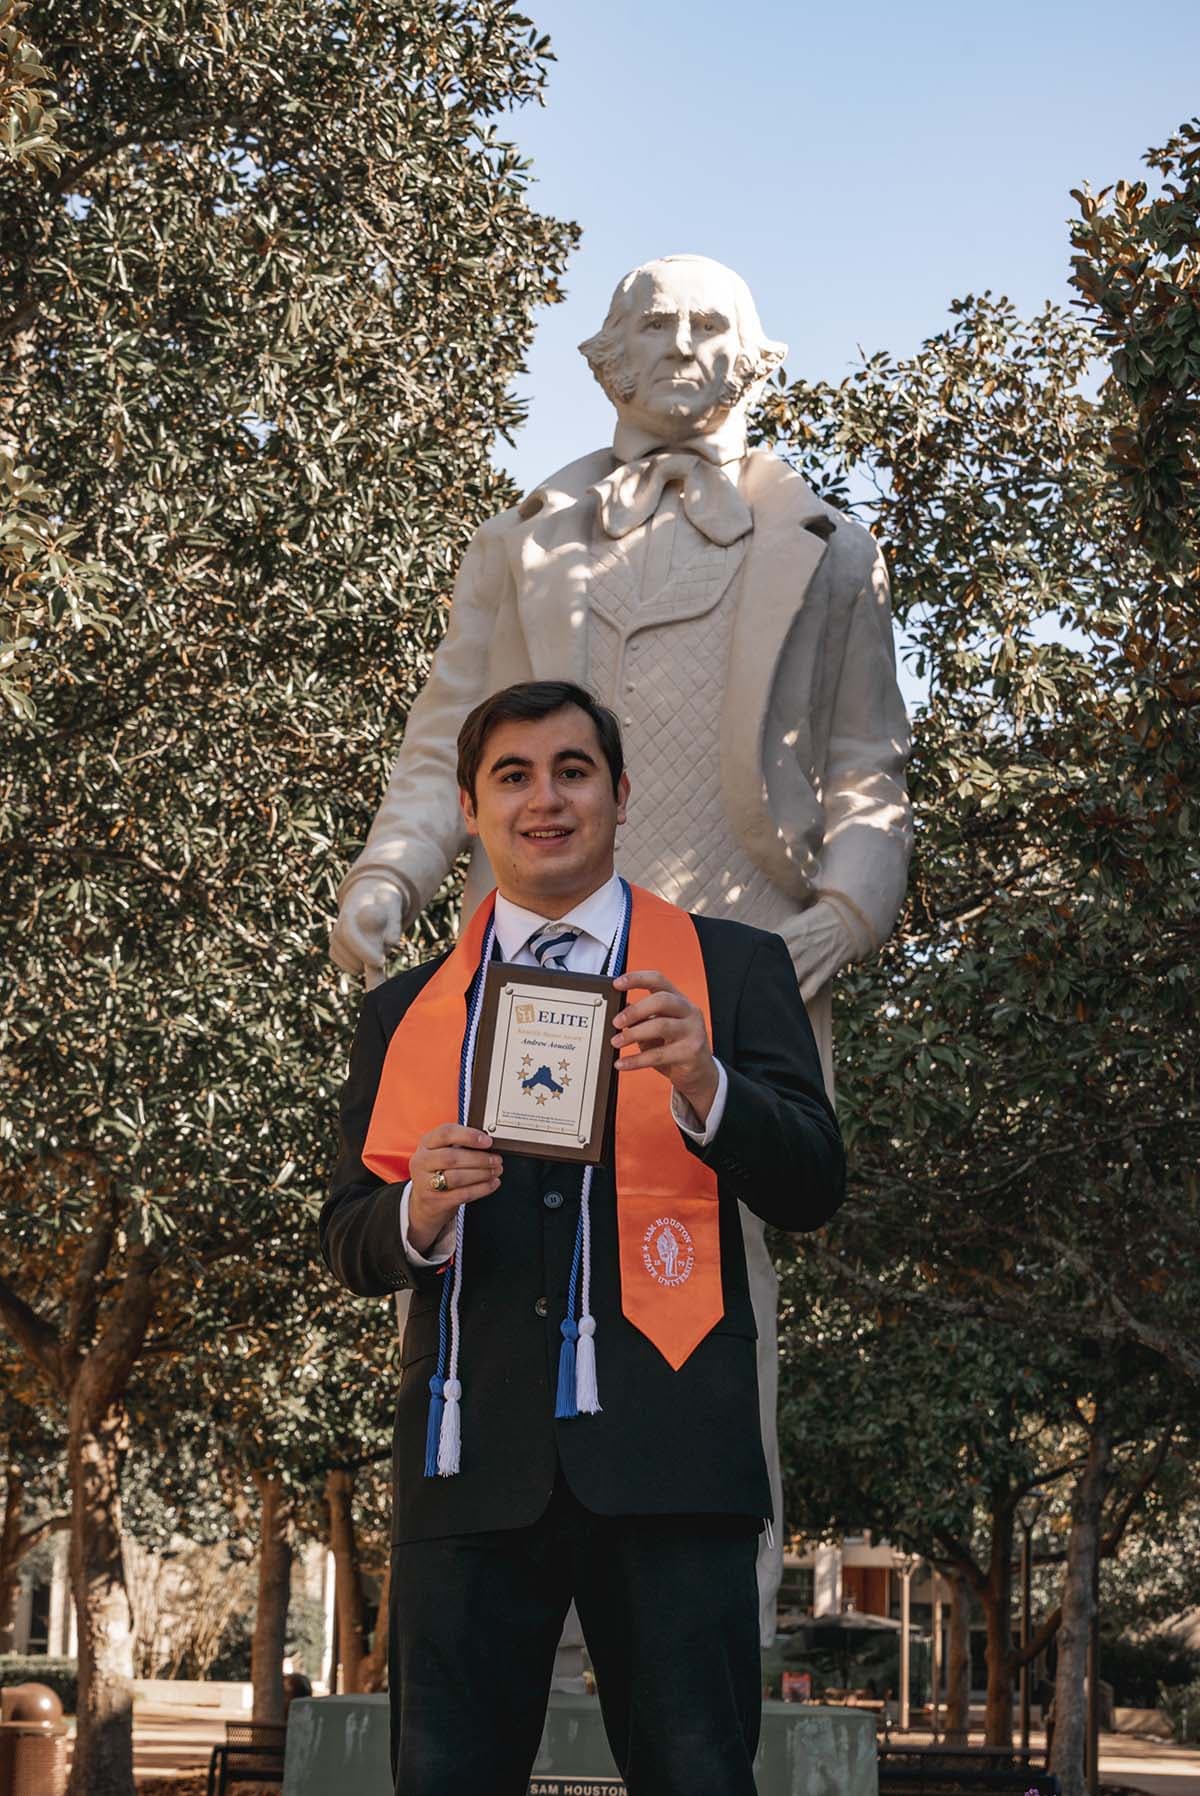 Andrew Aoueille poses in front of the Sam Houston statue in the middle of the SHSU campus.